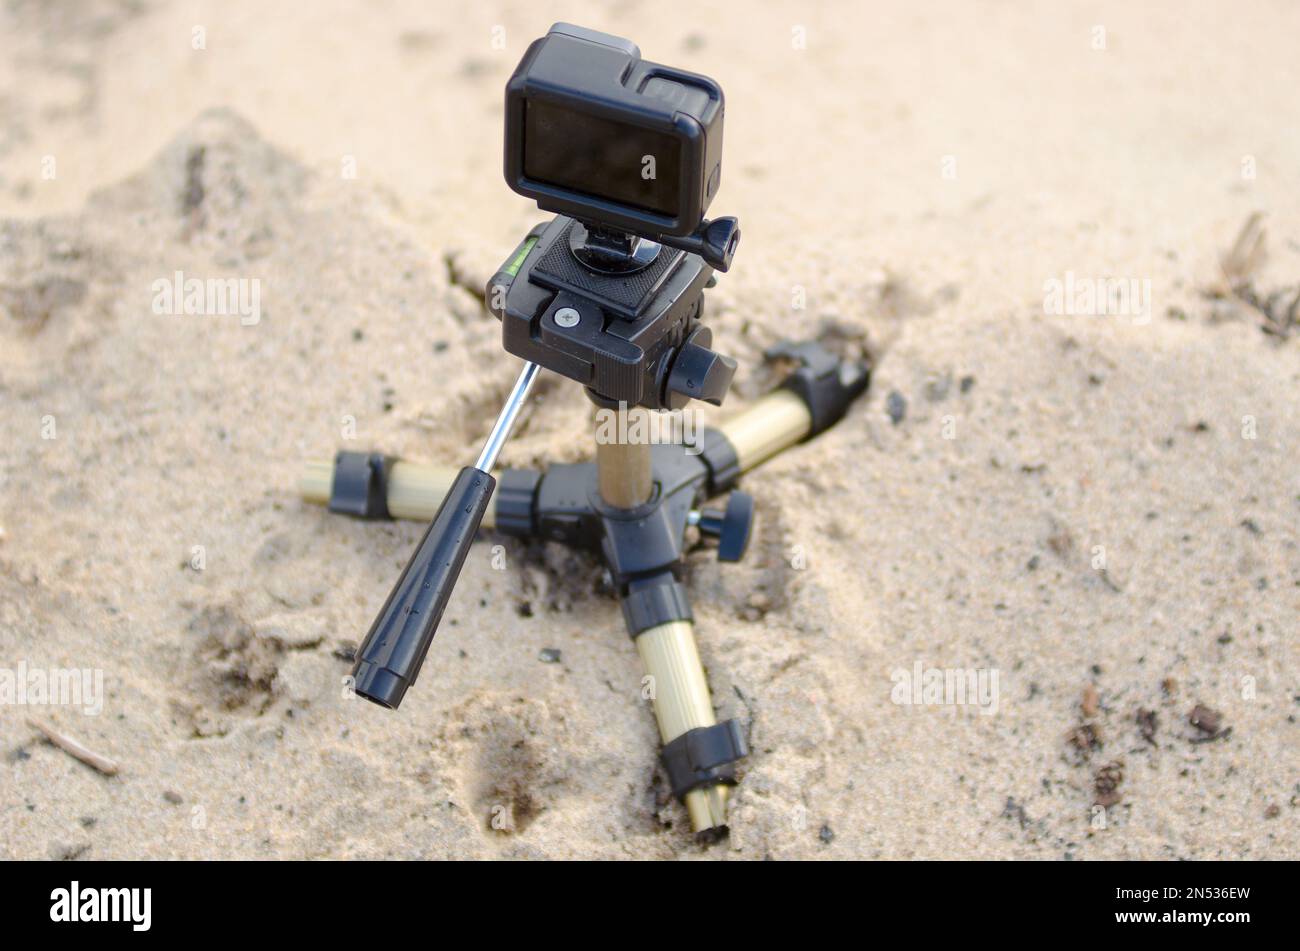 Action camera stands on a small tripod, recording video on a sandy beach. Stock Photo